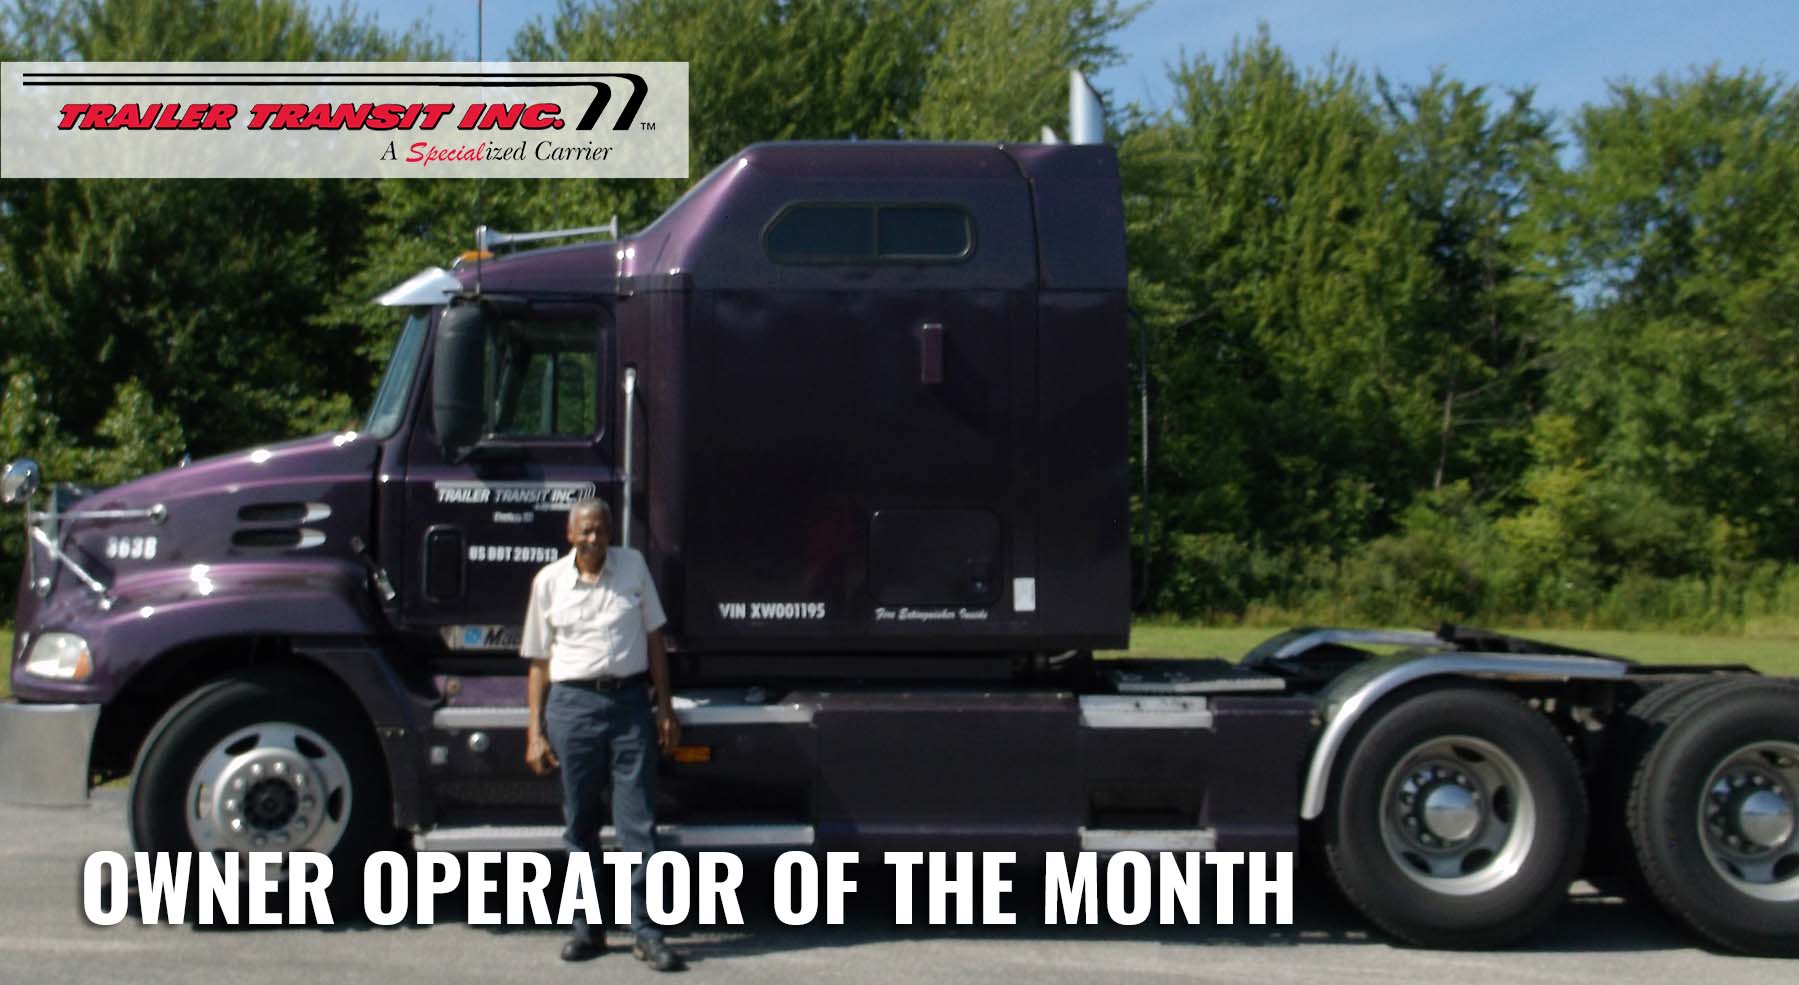 Trailer Transit Inc. Owner Operator of the Month for January 2021